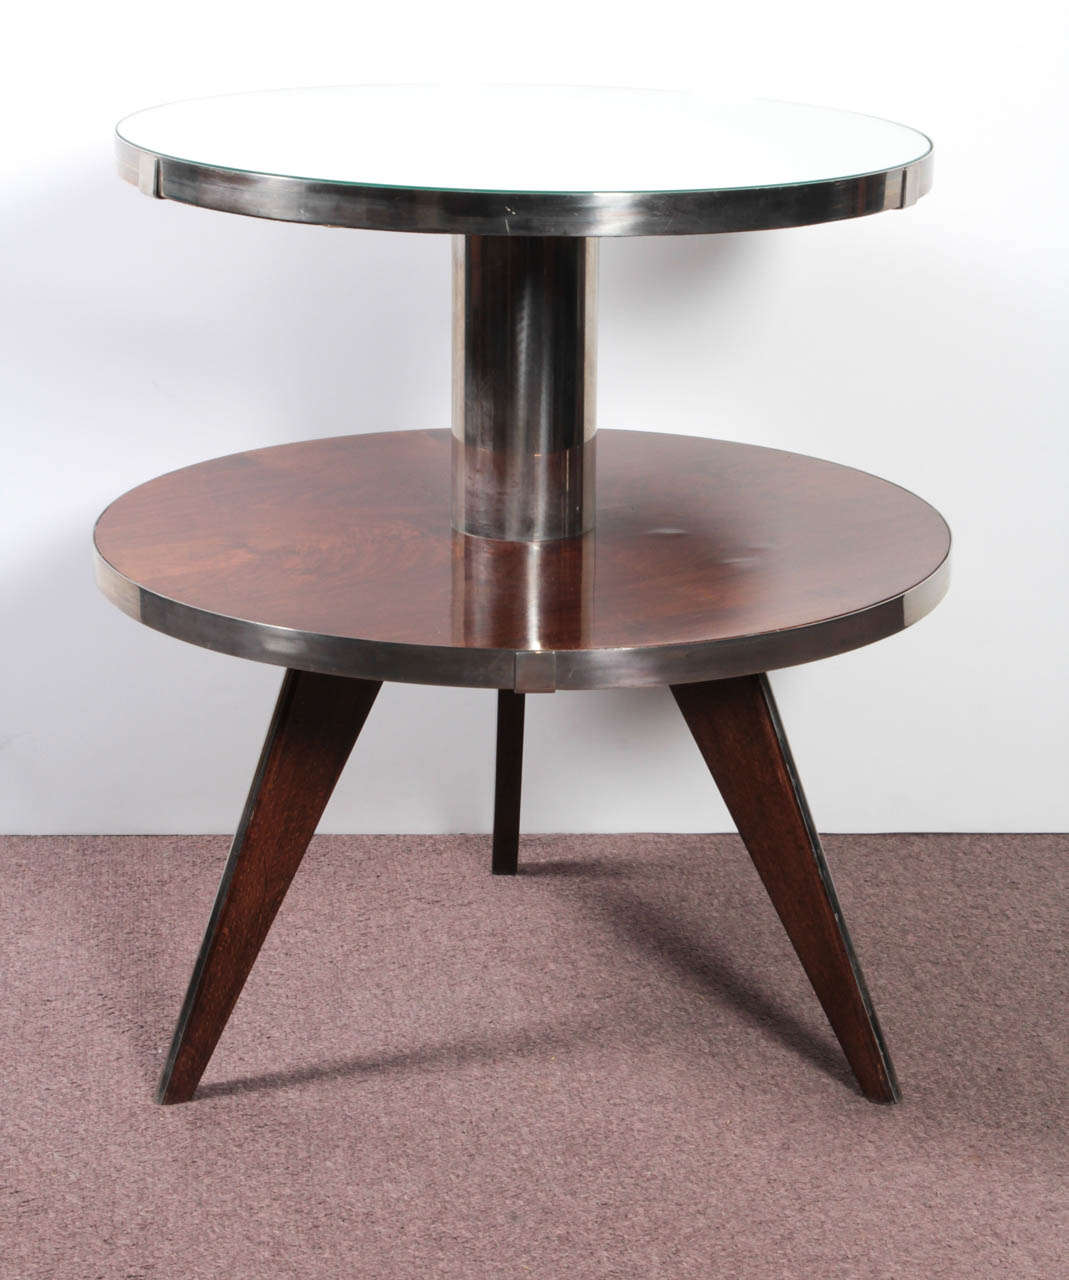 French Art Deco Occasional Table in Wood, Mirror, Nickel -Maurice Triboy In Good Condition For Sale In New York City, NY